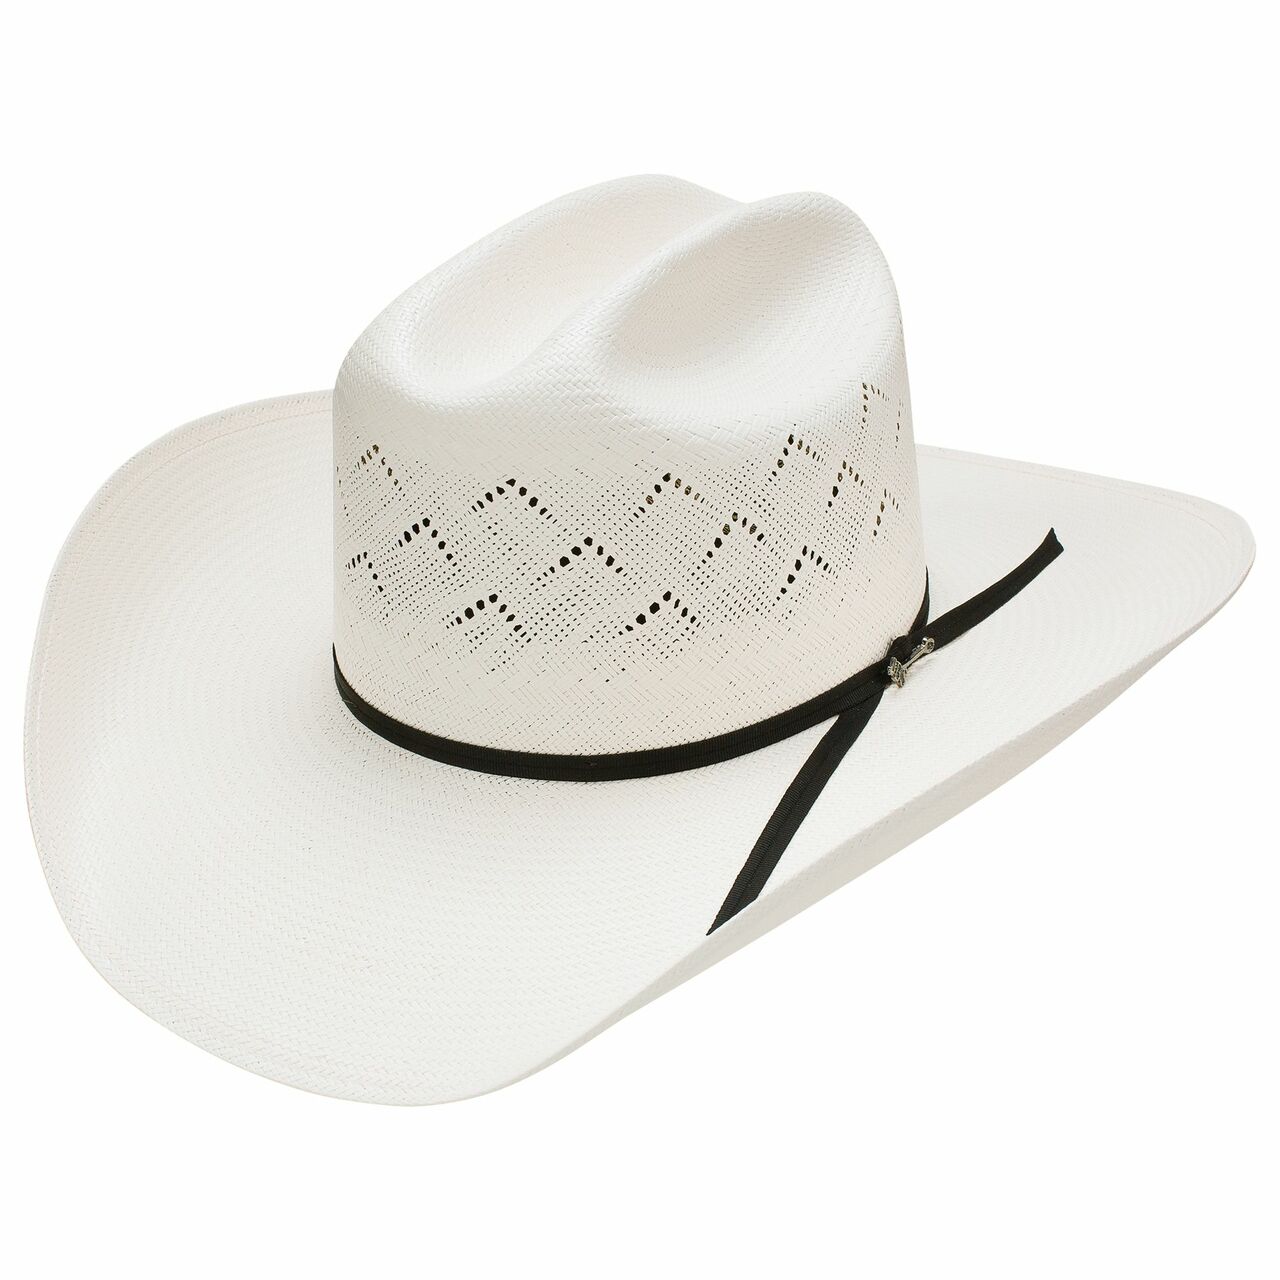 Stetson Classics Collection Rocky Top Straw Cowboy Hat